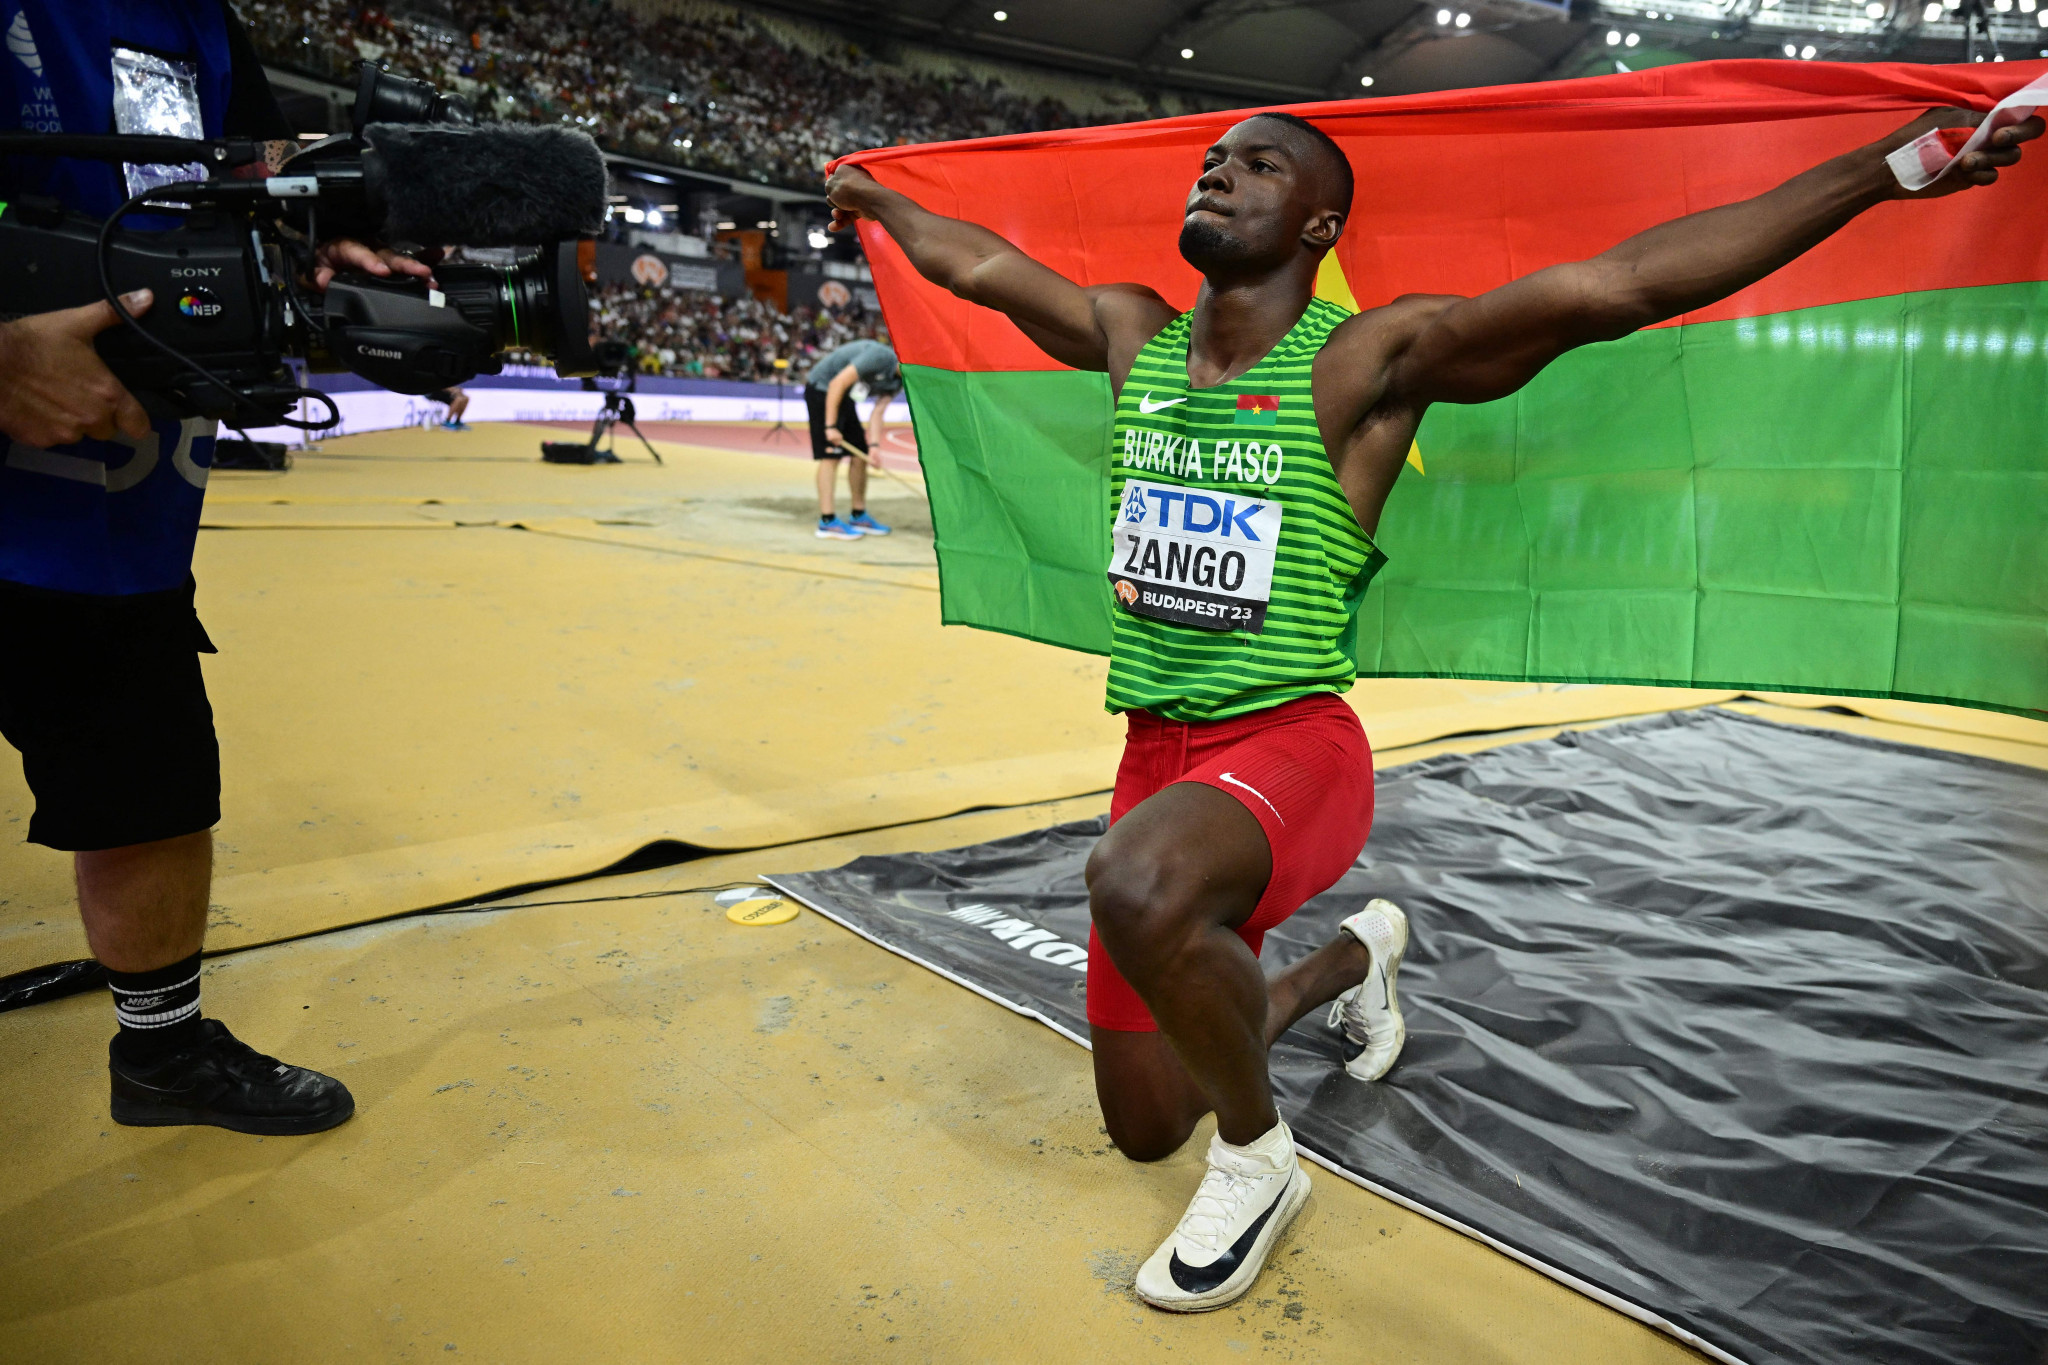 Burkina Faso's Hugues Fabrice Zango claimed his maiden World Athletics Championships gold in the men's triple jump, after a silver in the event last year ©Getty Images